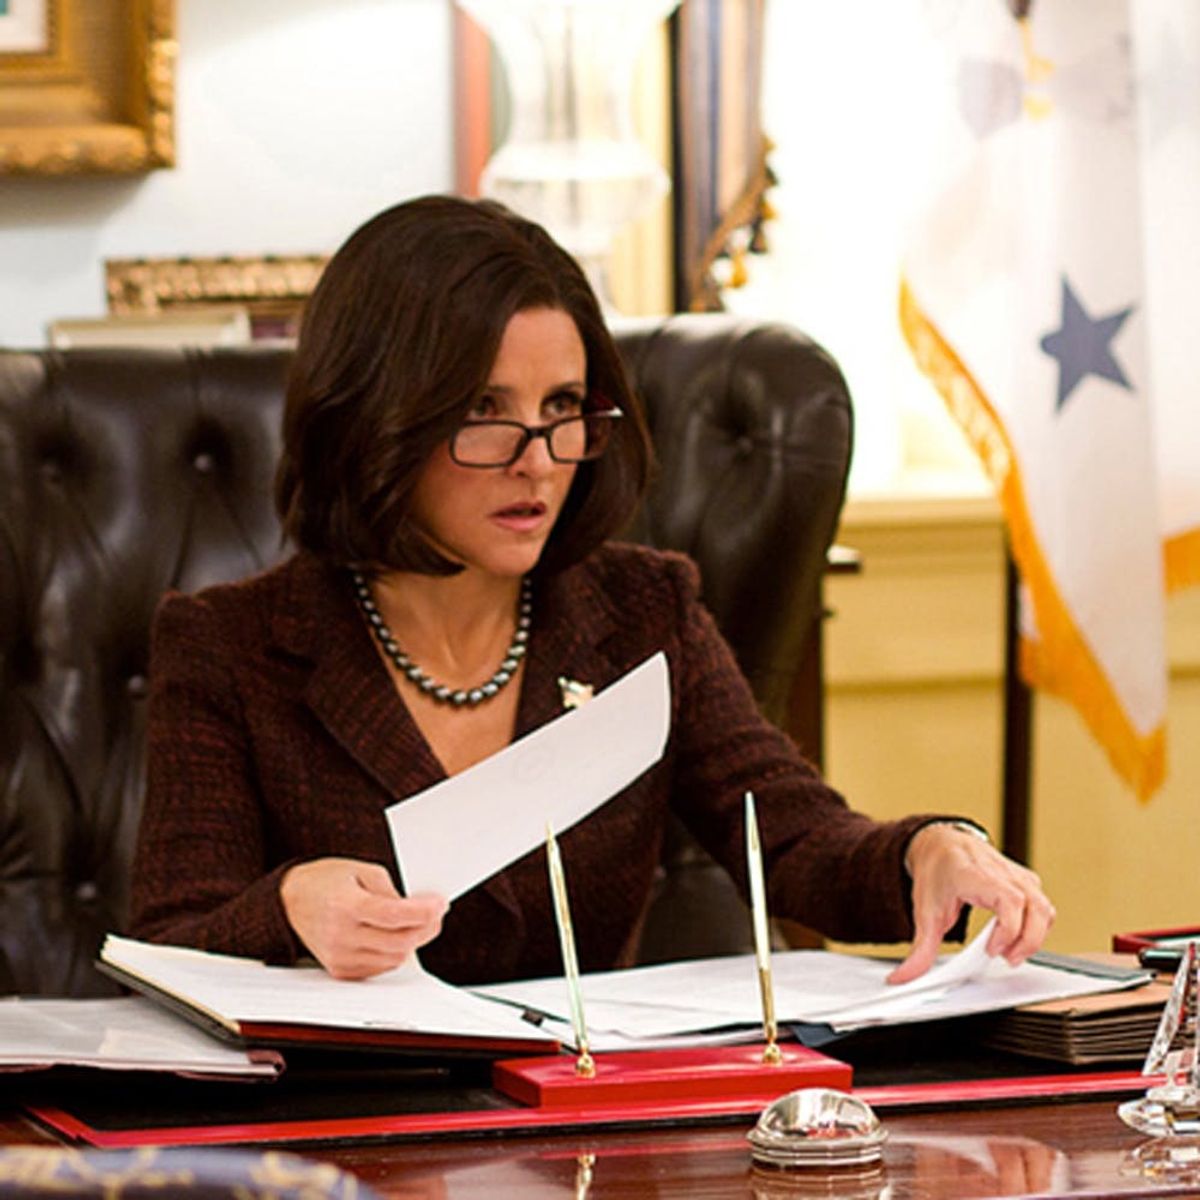 4 More Shows for Everybody Who Loves Veep